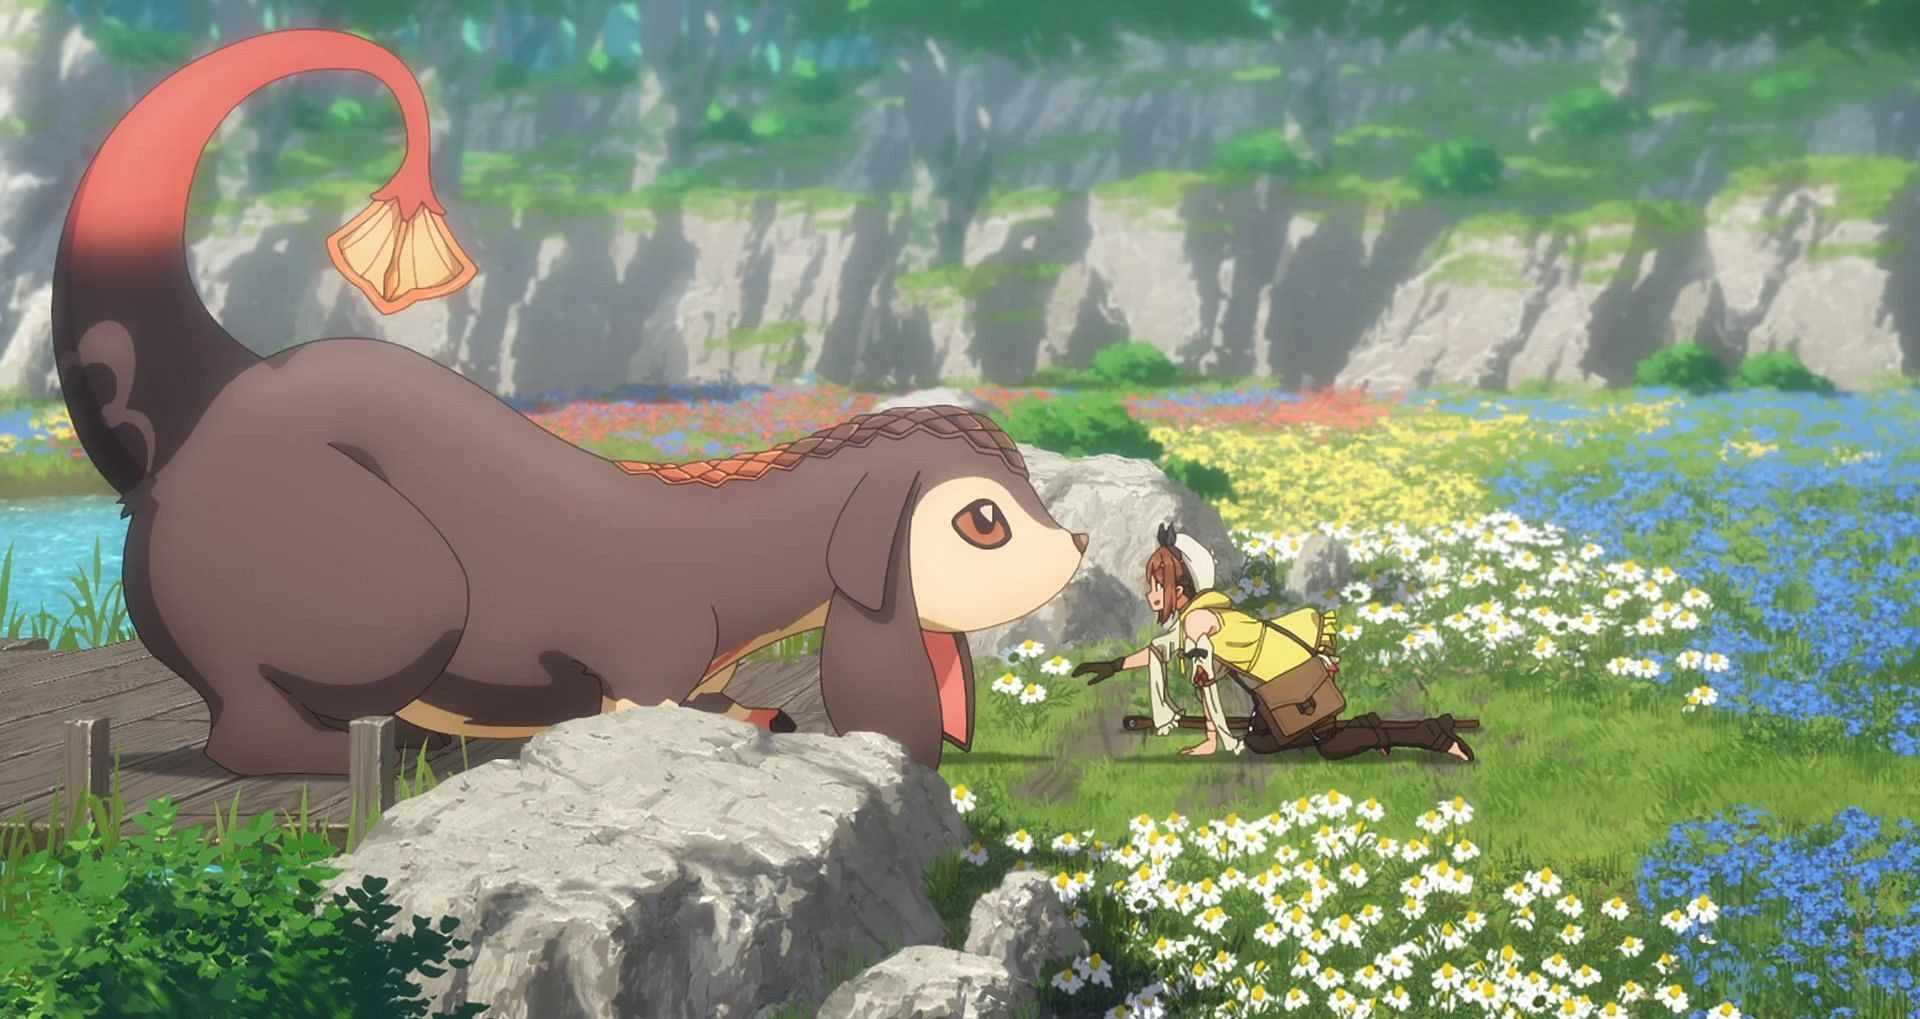 Ryza stumbles upon a monster in search of Serenity Flower (Image via LIDENFILMS)